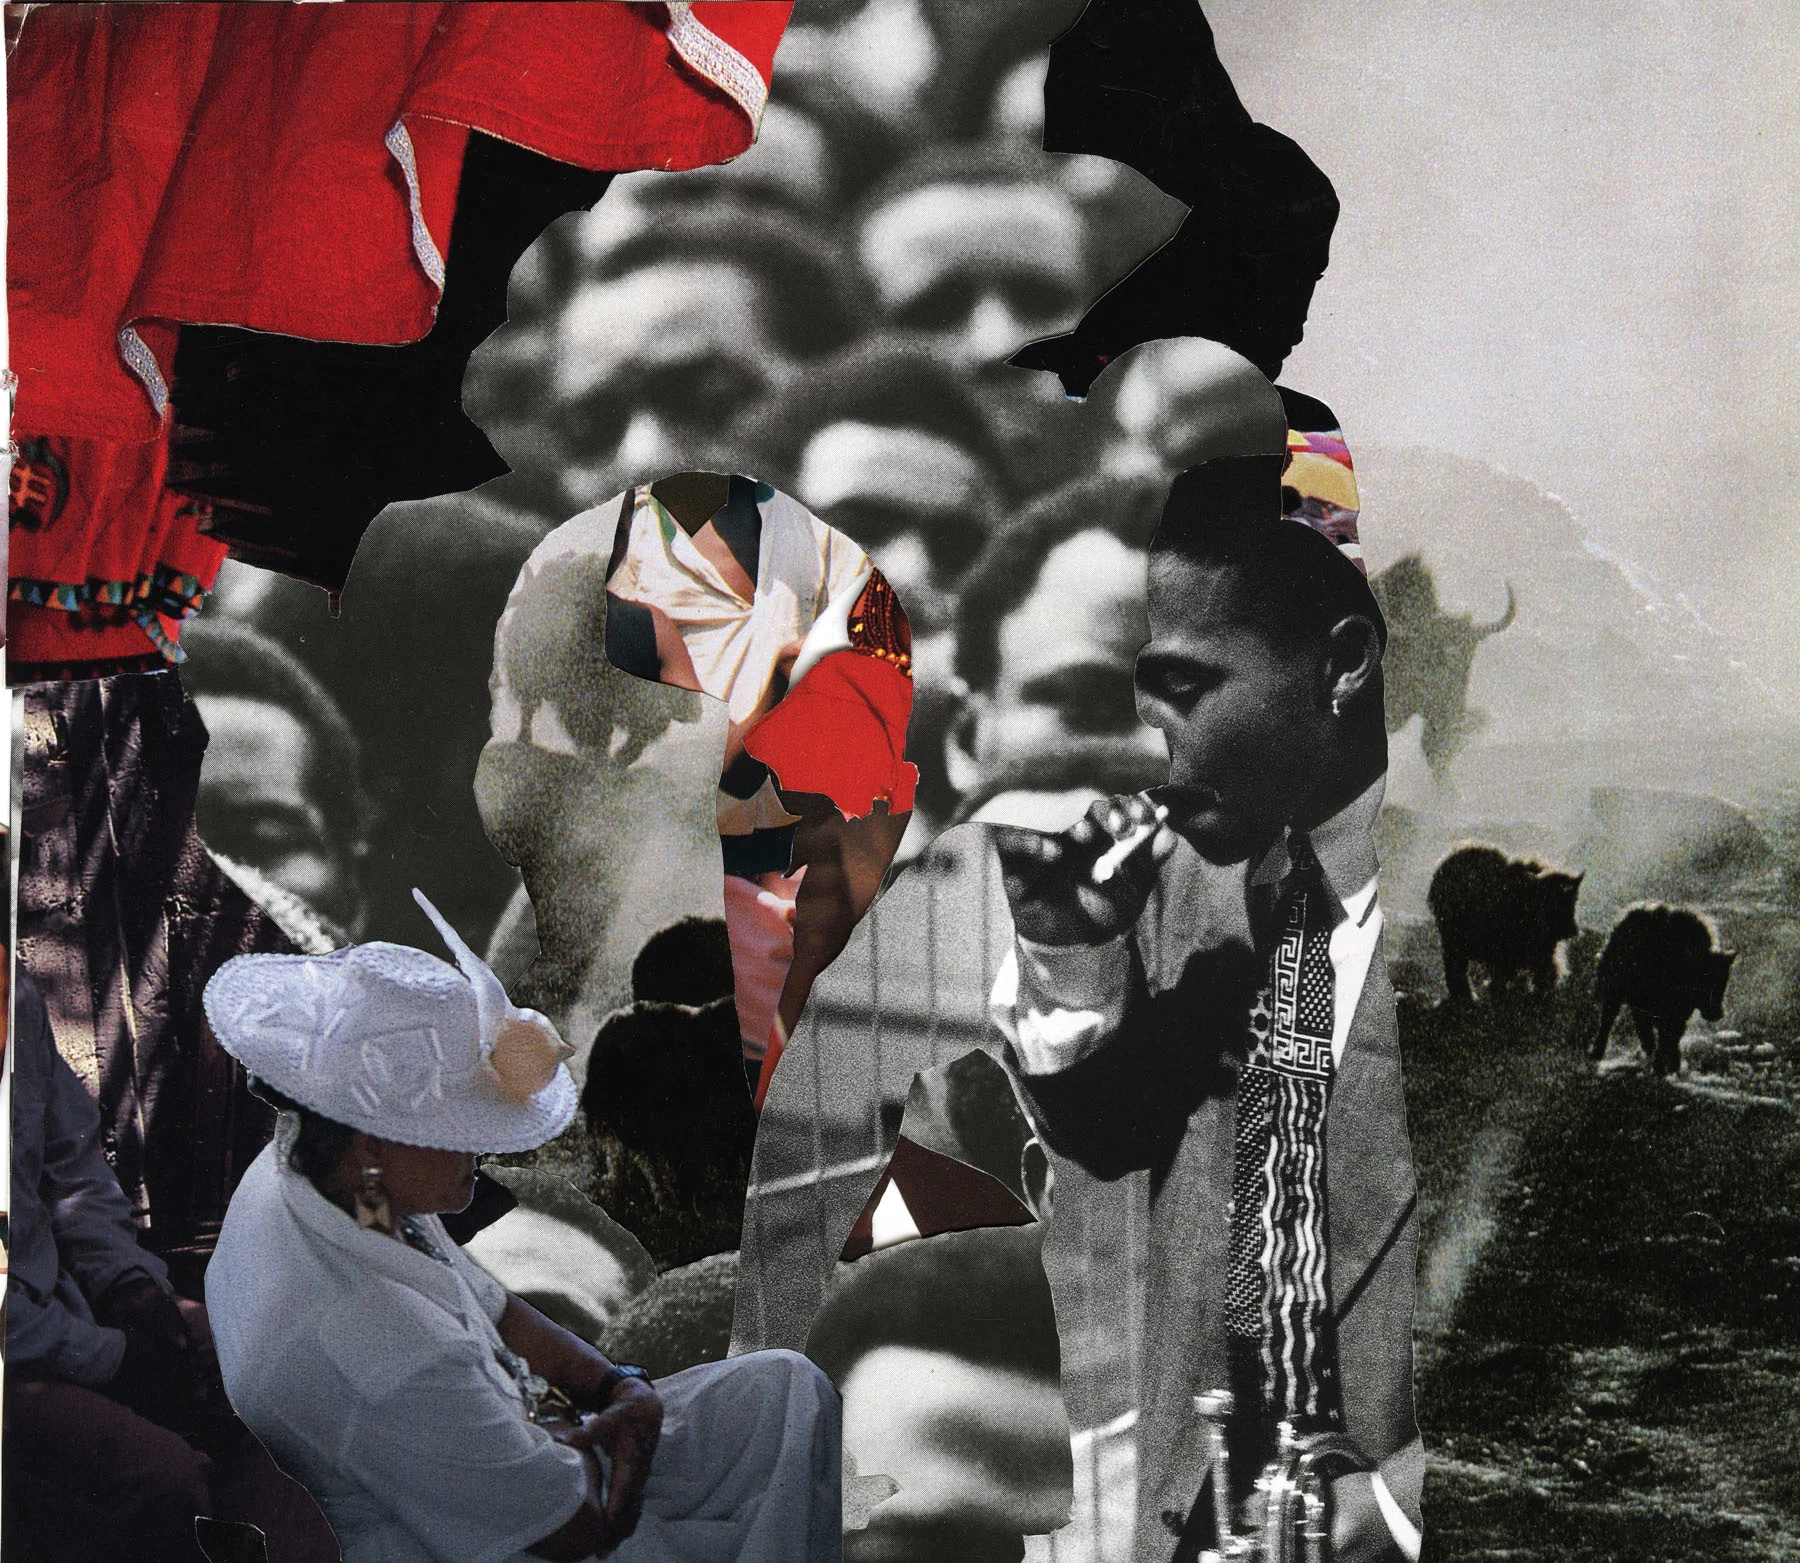 Photo collage of a group of men overlayed with an insert of a single man smoking a cigarette and surrounded by cattle. A woman sits in the corner 